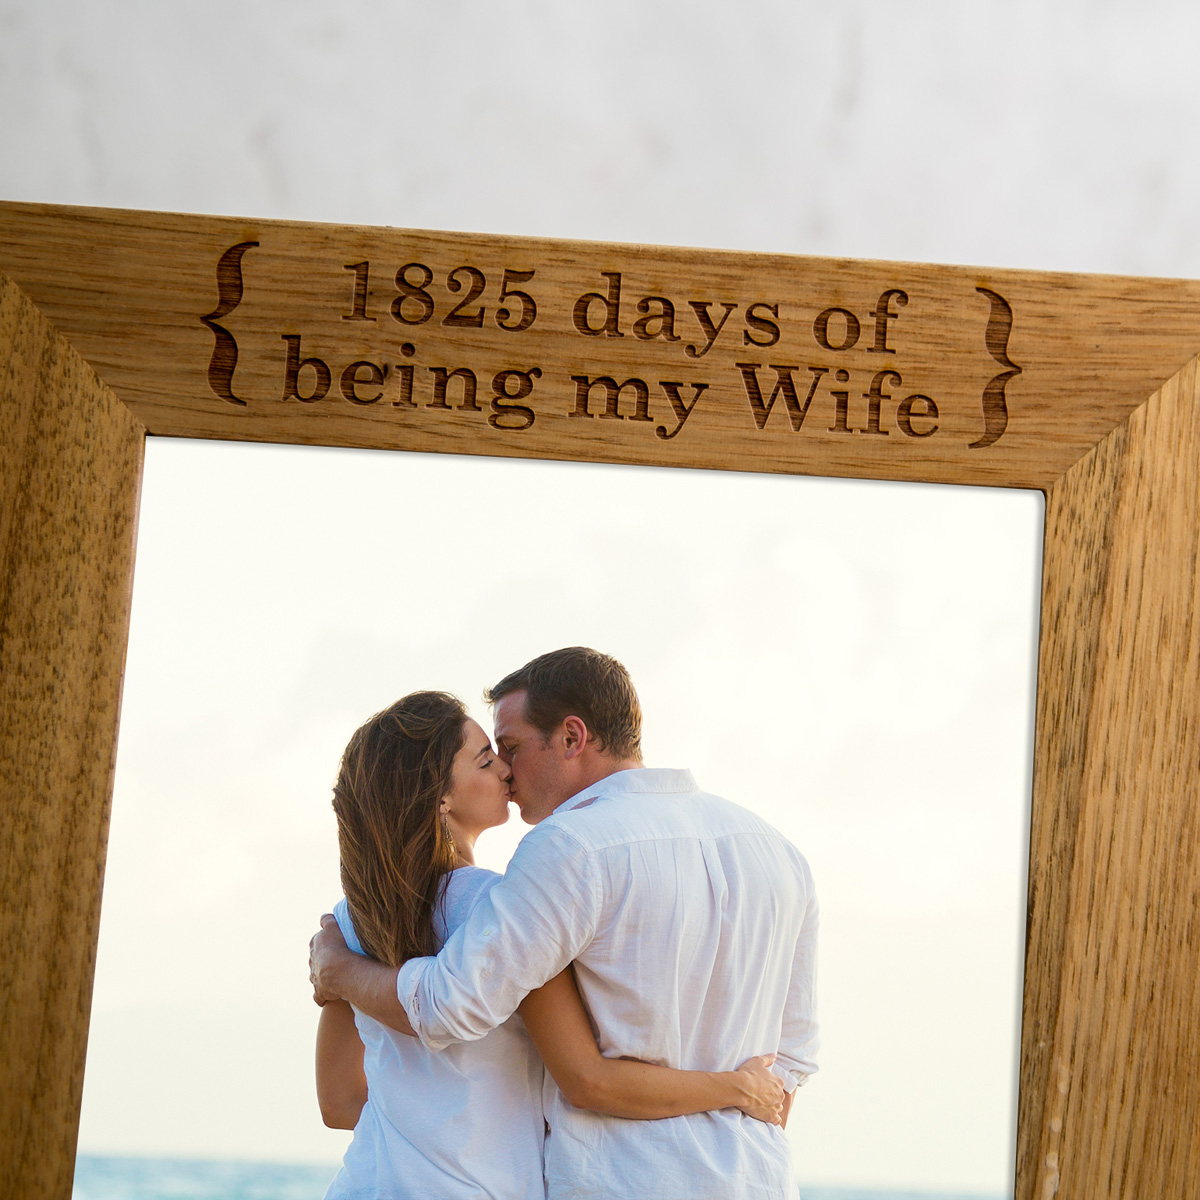 Personalised Wooden Photo Frame - My Wife For 1825 Days 5 Years